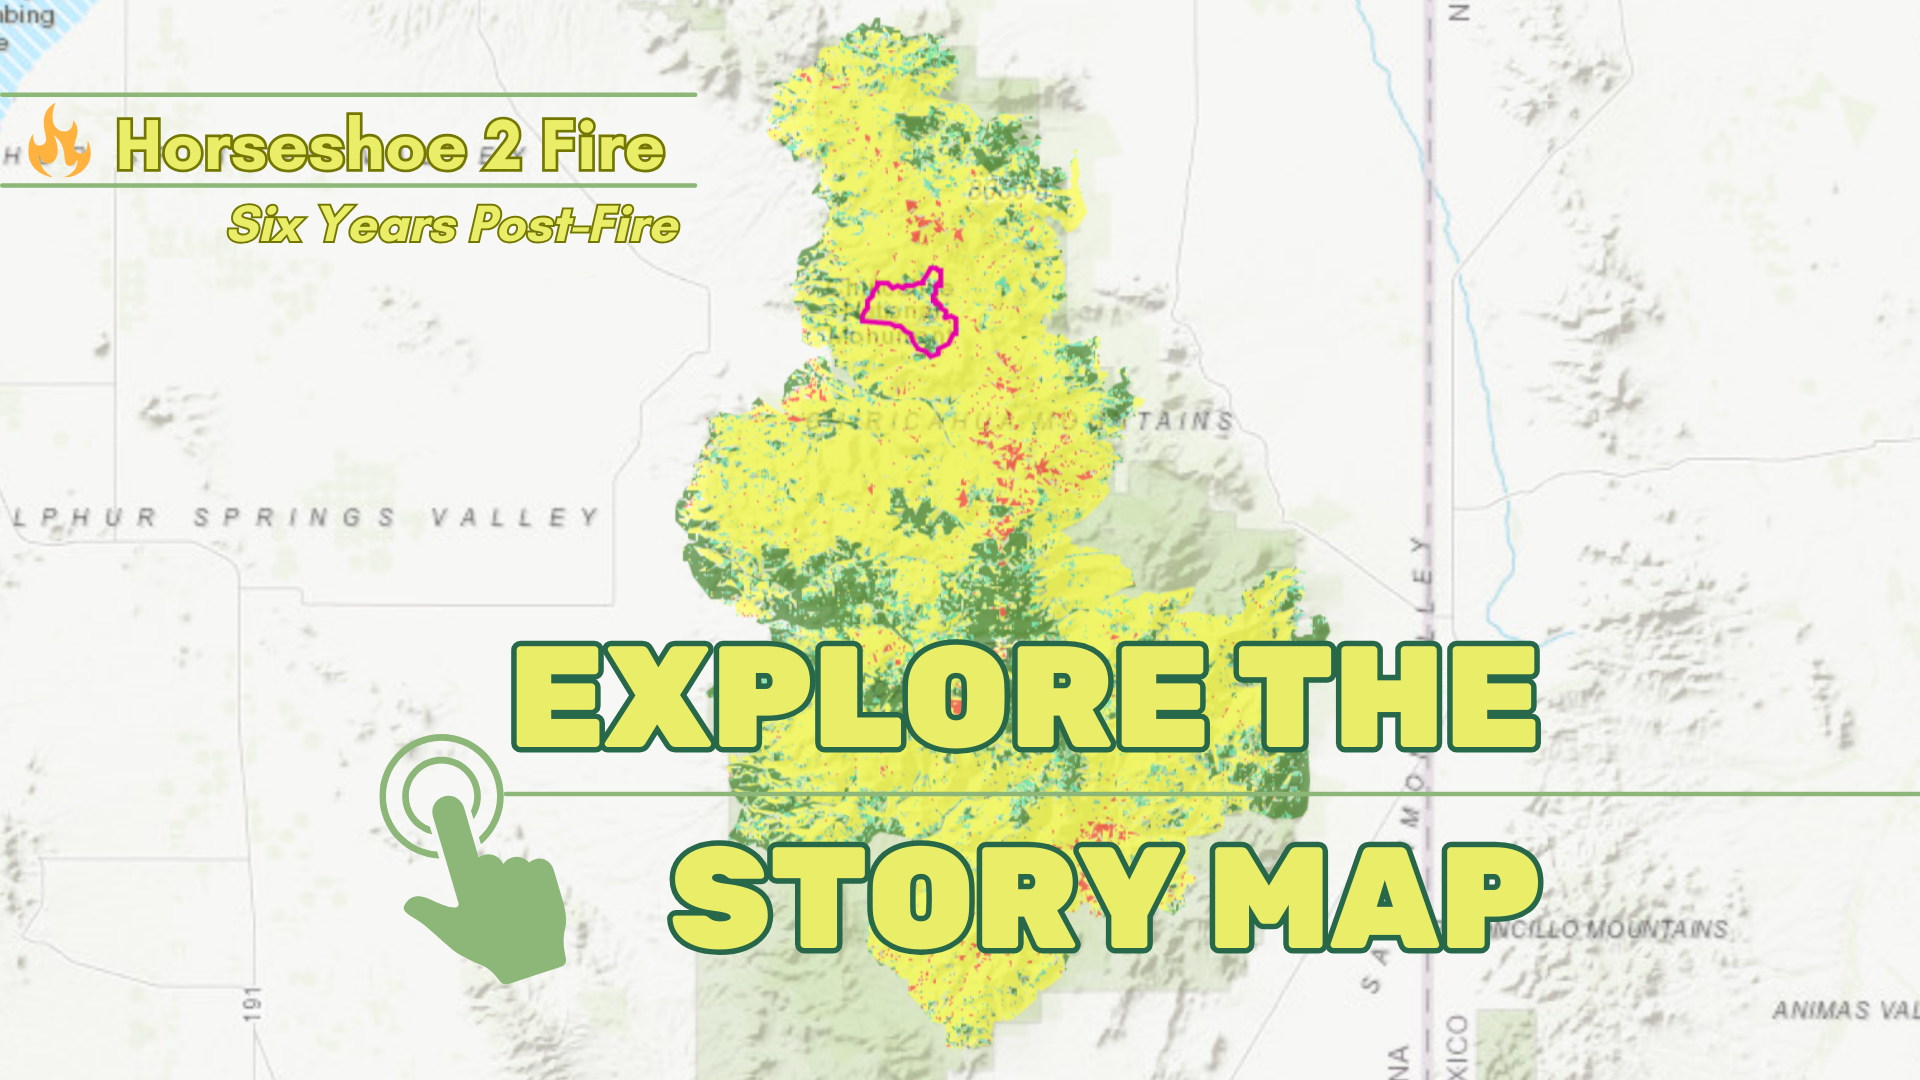 A Map depicting the boundary of the severity of the Horseshoe 2 Fire is overlayed with text reading "Horseshoe 2 Fire: 6 years post fire" and "Explore the Story Map"